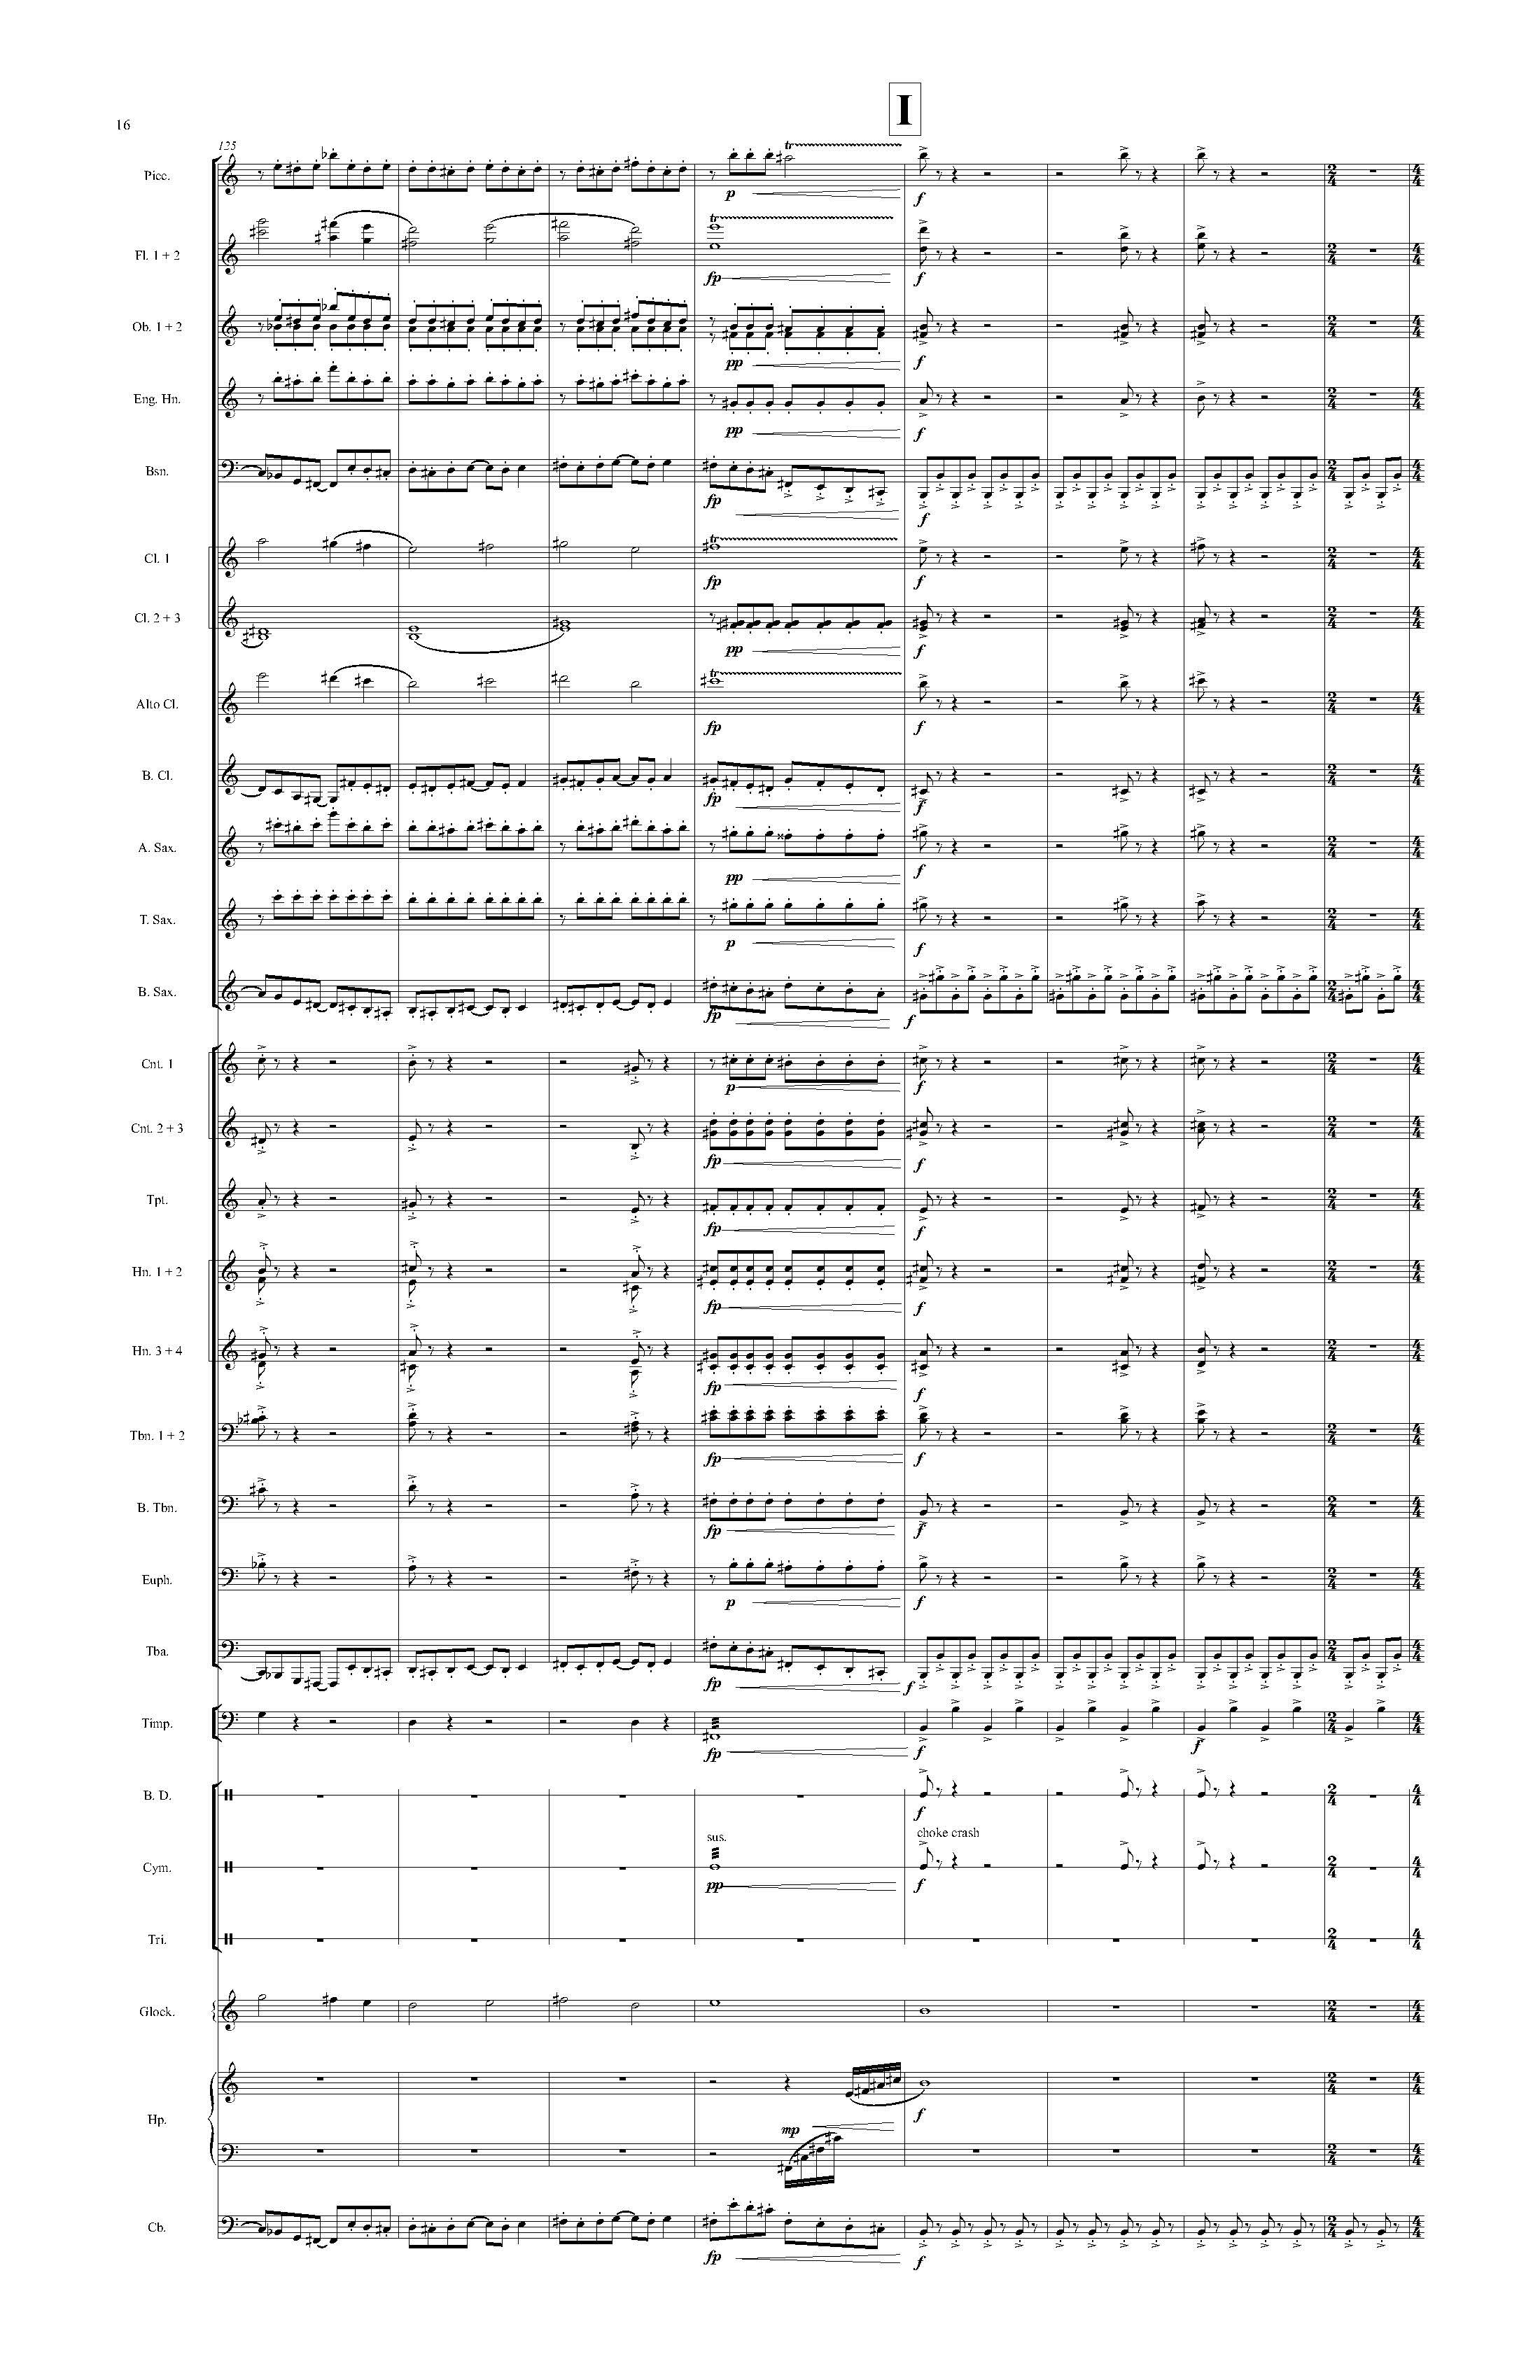 Psyche - Complete Score_Page_22.jpg